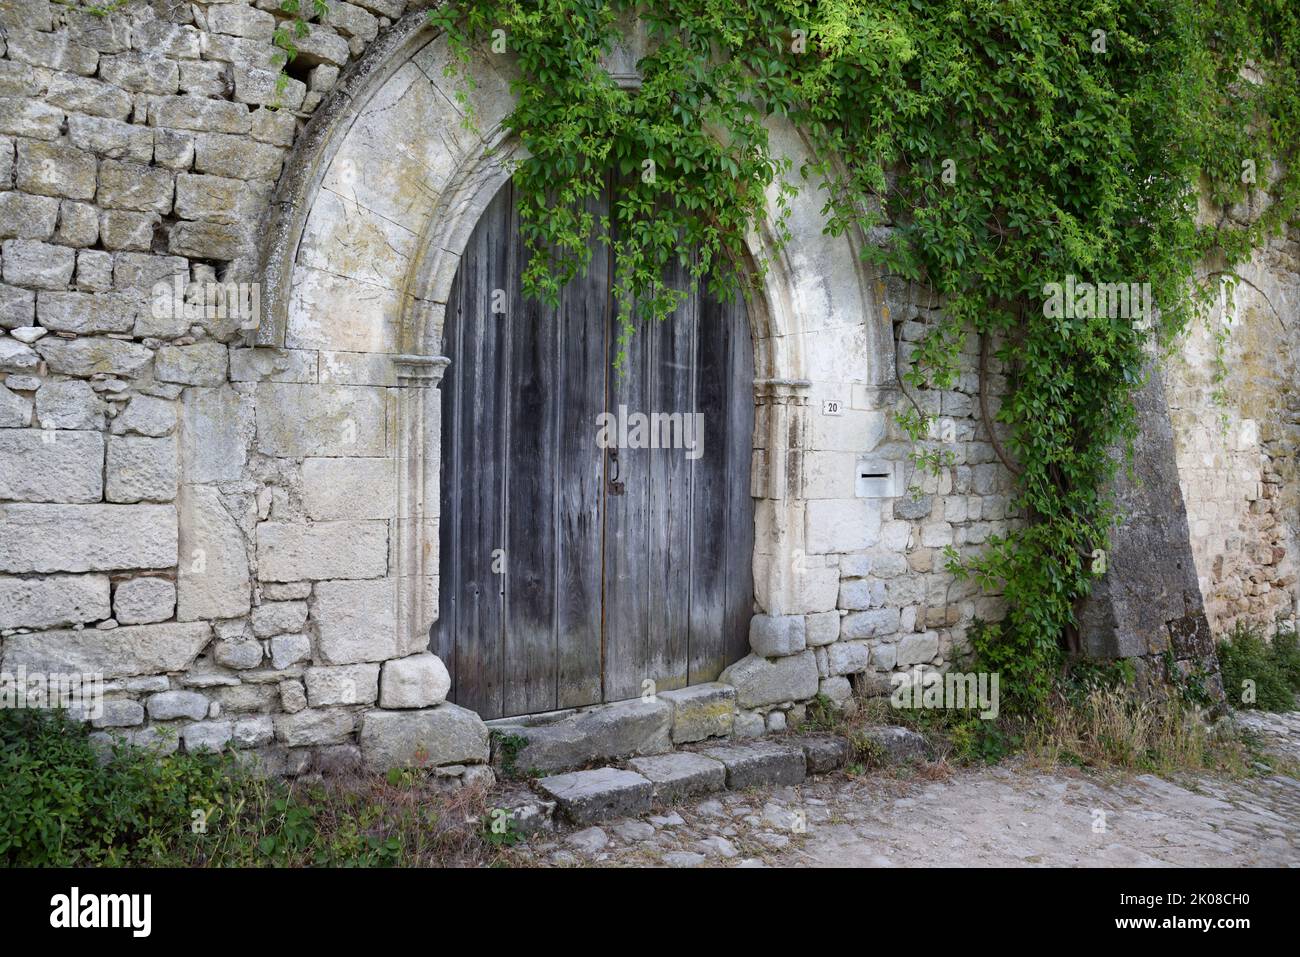 Medieval Style or Old Wooden Door or Doorway Oppede le Vieux Vaucluse Luberon Provence France Stock Photo